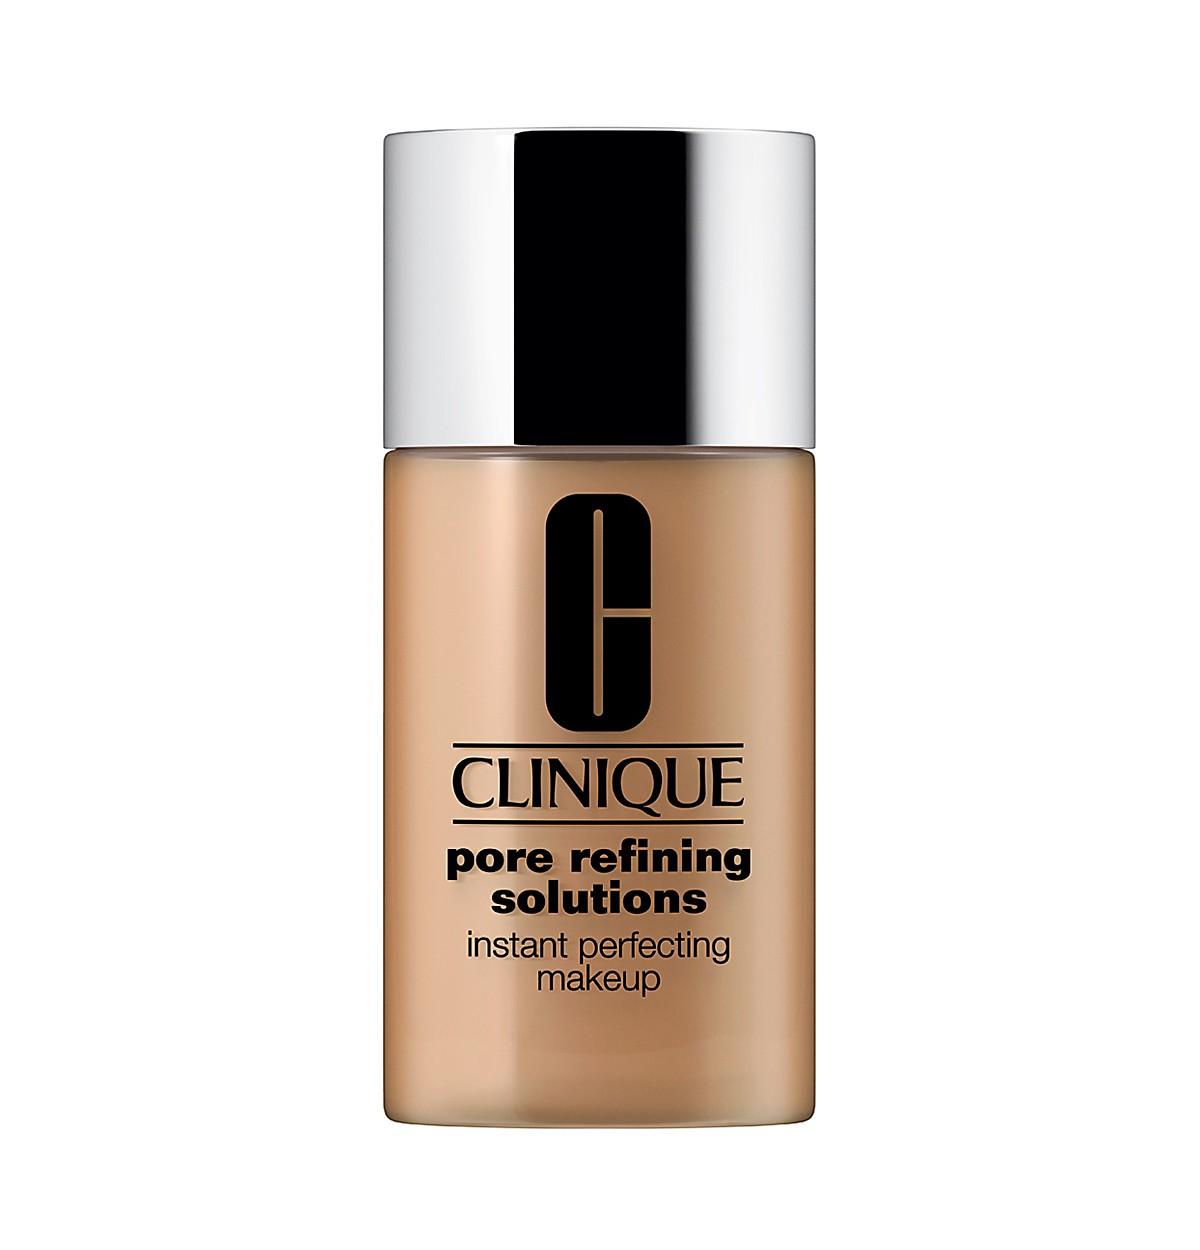 Foto Mujer Maquillaje Clinique Pore Refining Solutions Instant Perfecting foto 762767